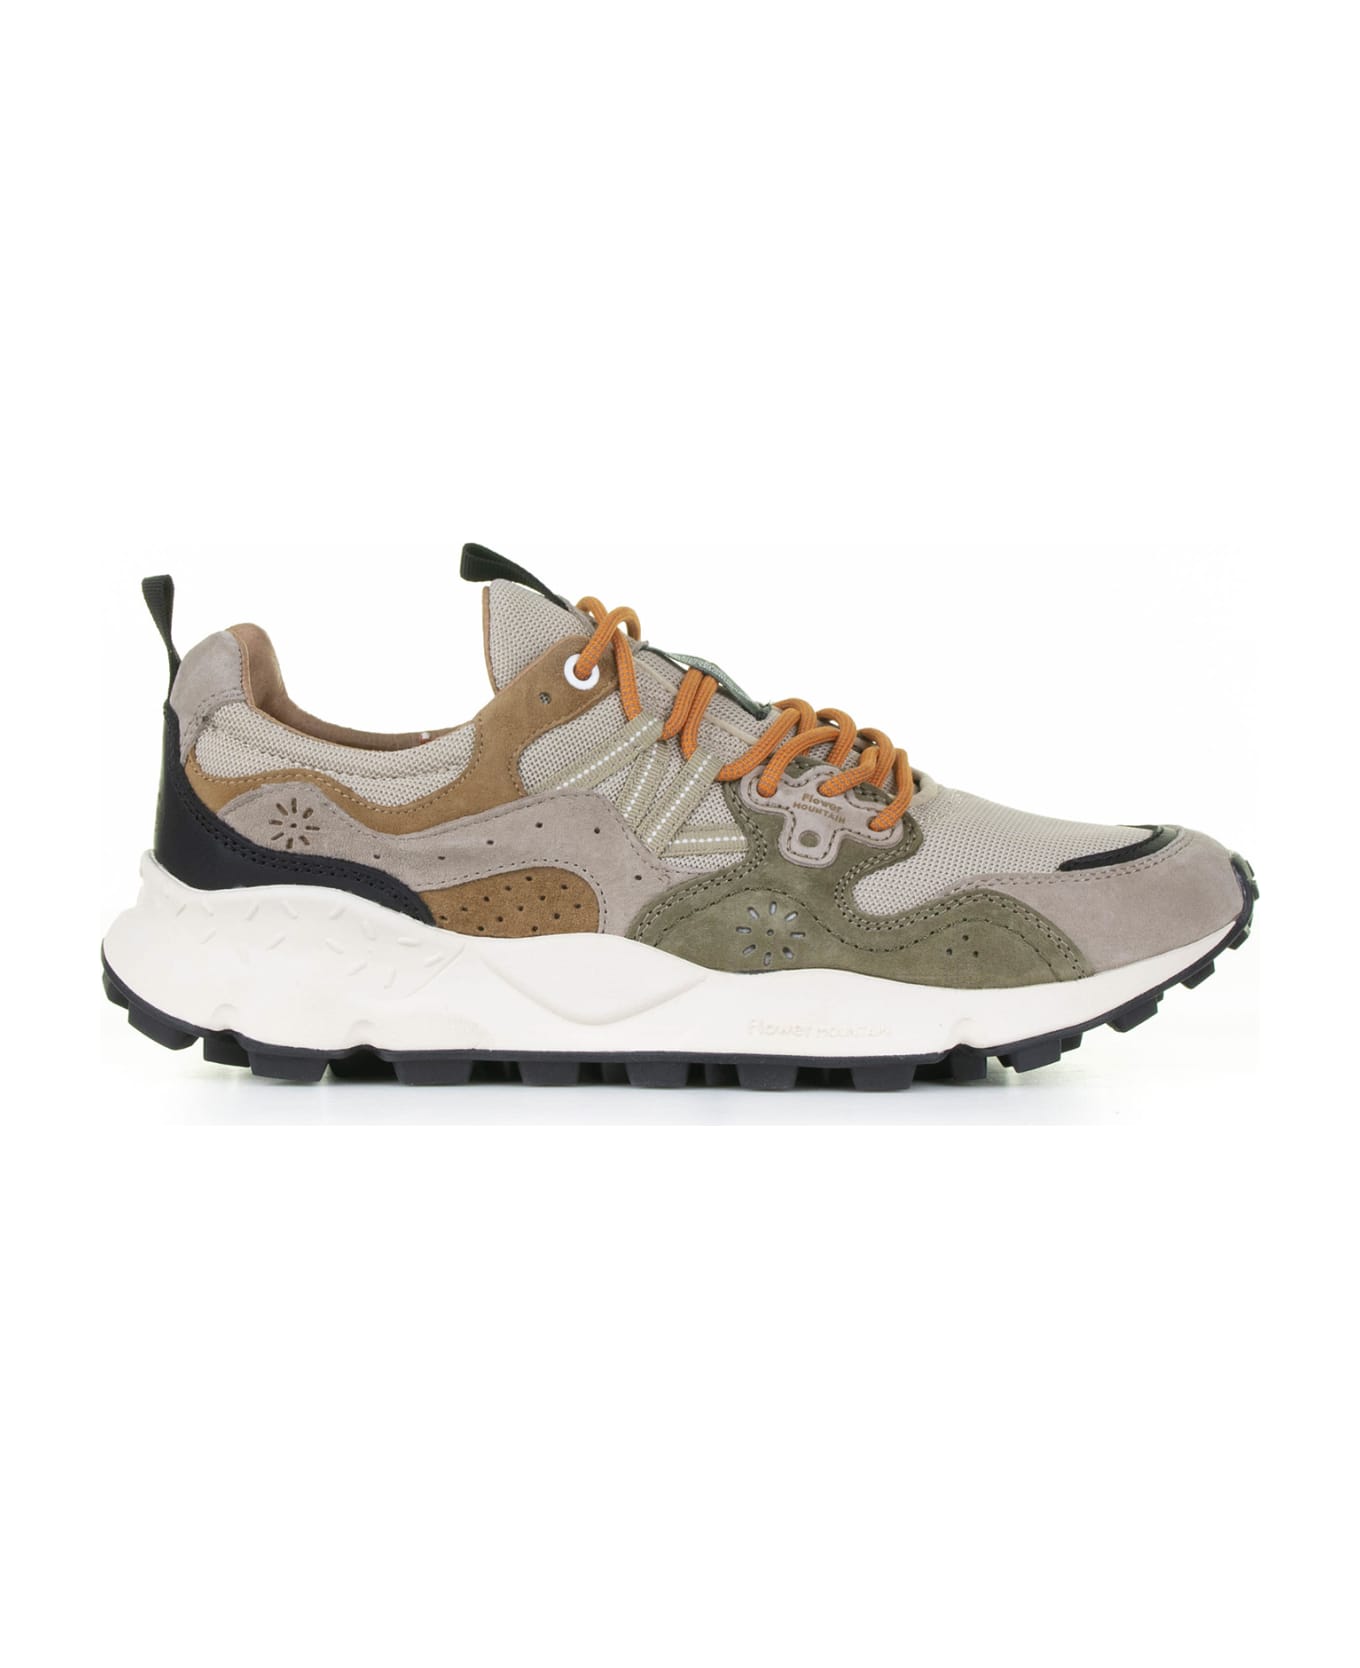 Flower Mountain Yamano Men's Sneaker In Suede And Nylon - SAND MILITARY